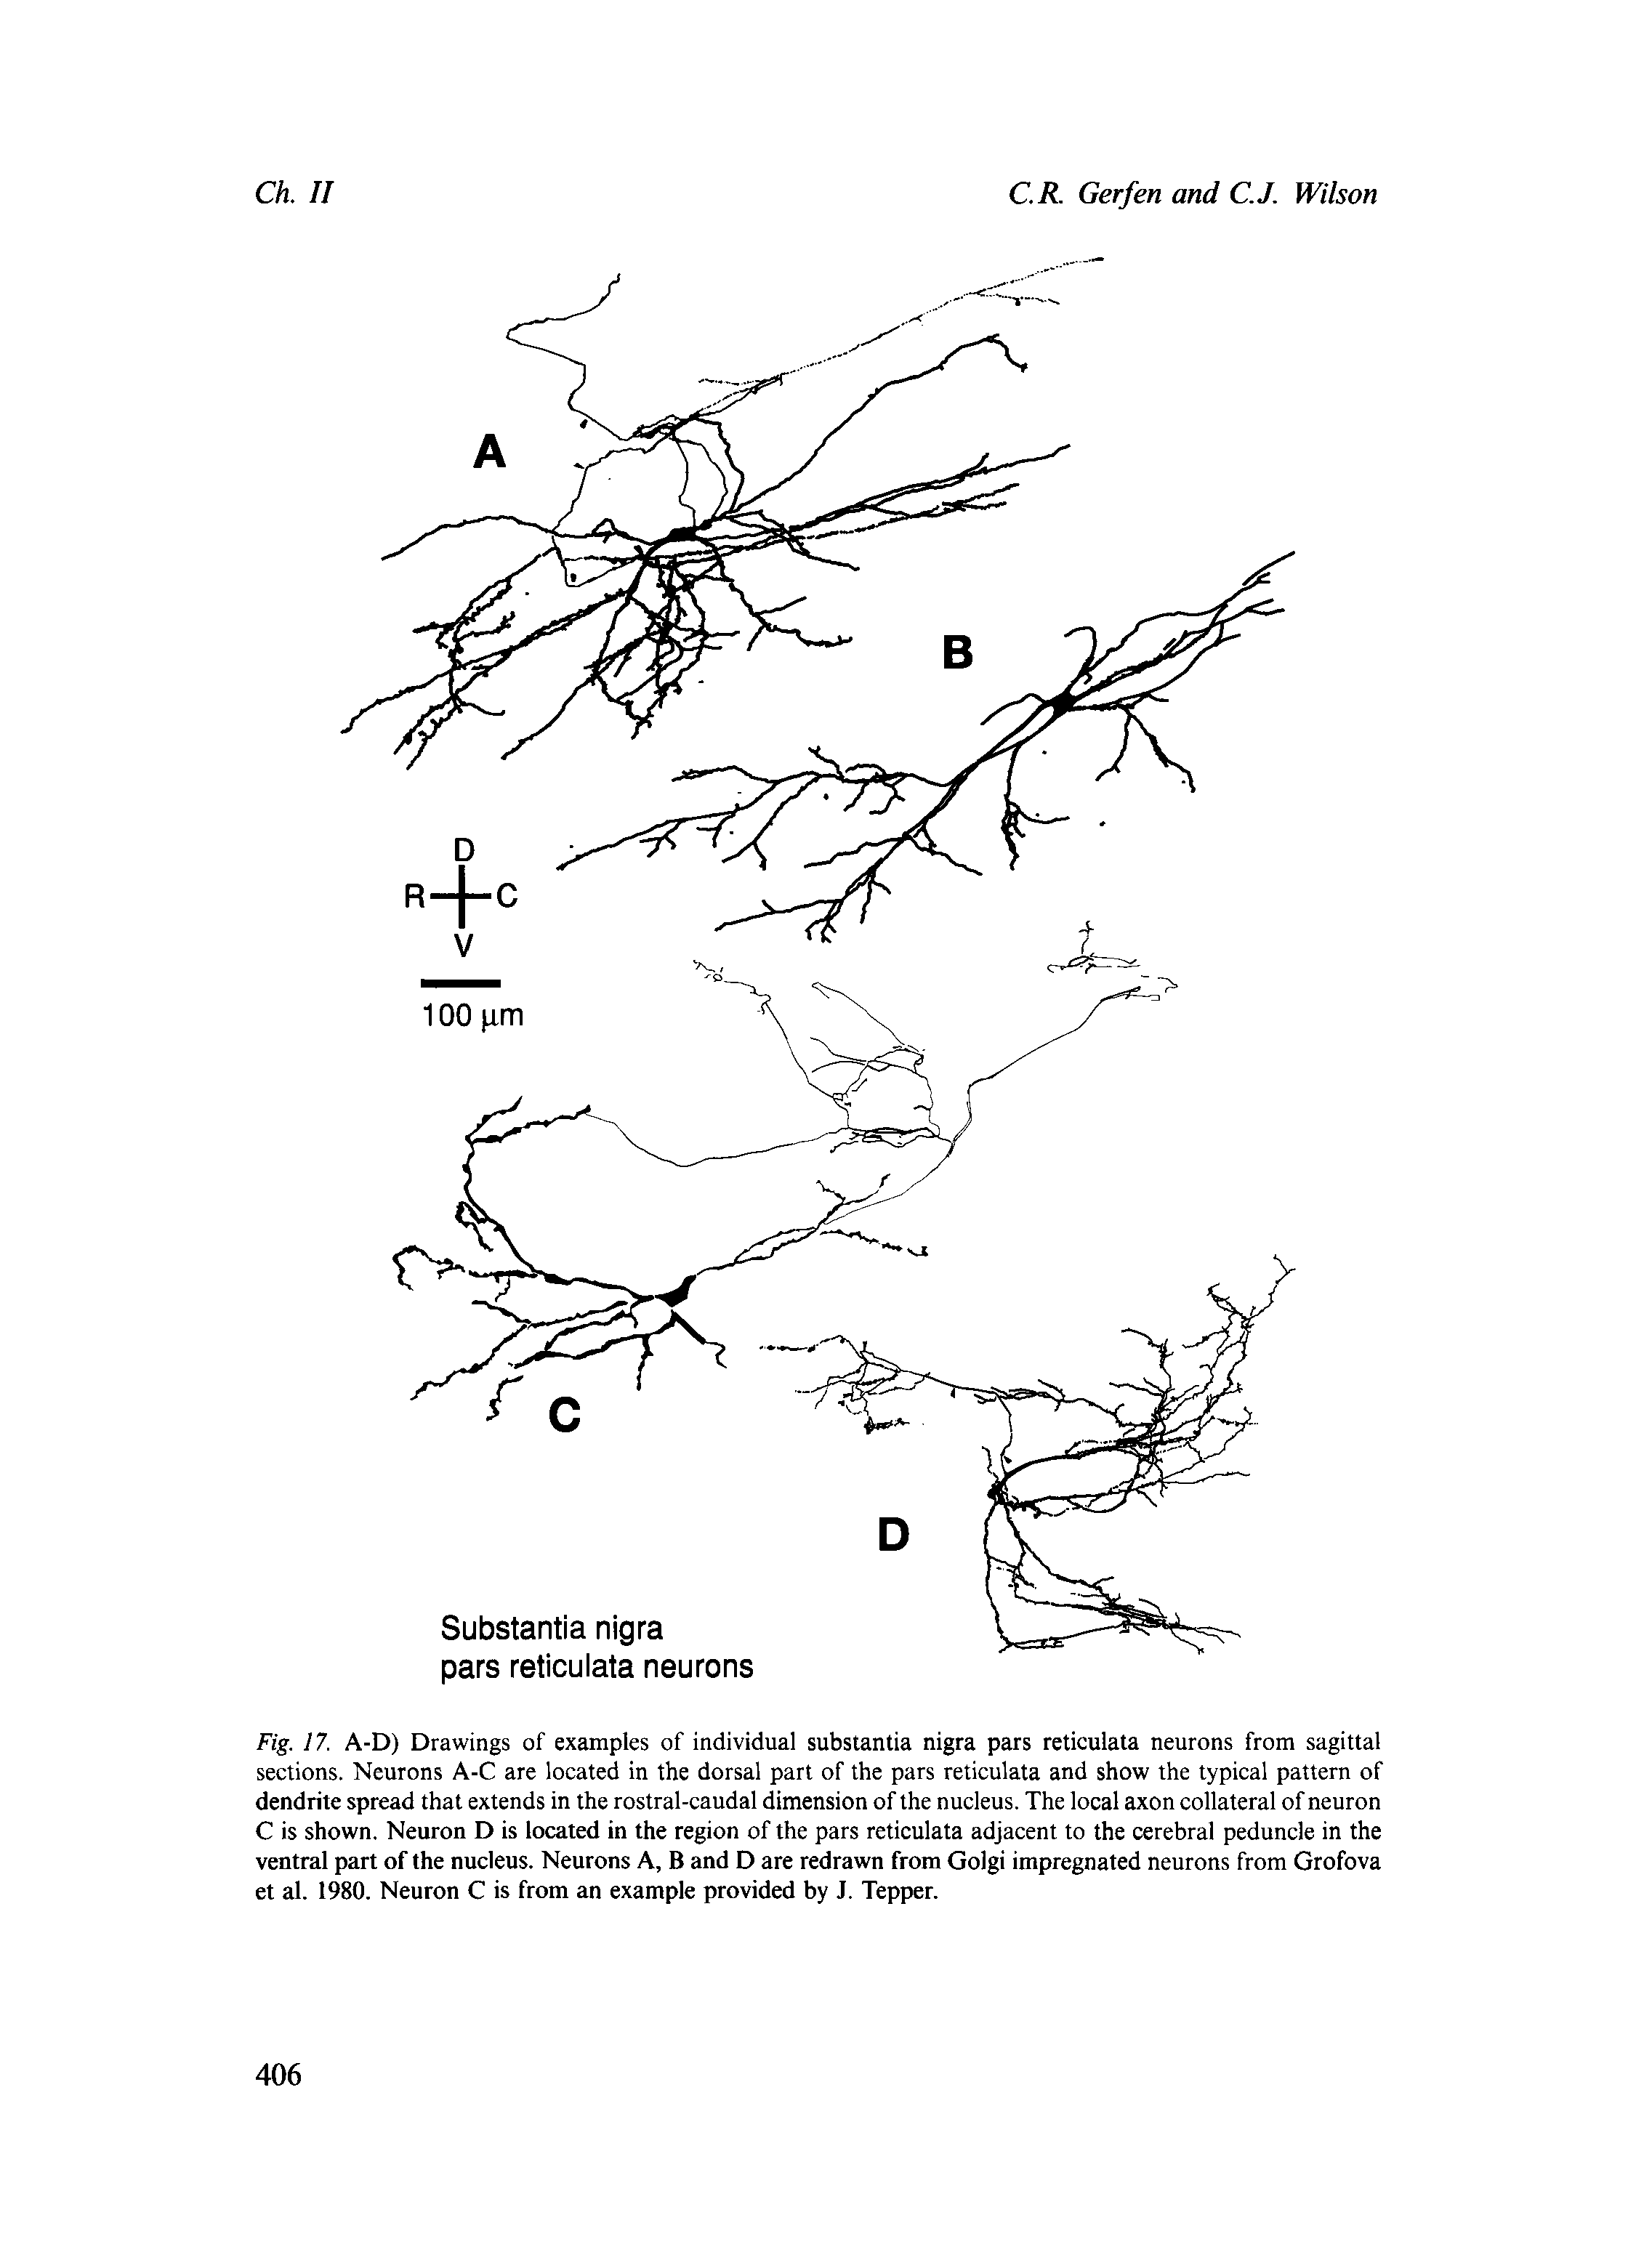 Fig. 17. A-D) Drawings of examples of individual substantia nigra pars reticulata neurons from sagittal sections. Neurons A-C are located in the dorsal part of the pars reticulata and show the typical pattern of dendrite spread that extends in the rostral-caudal dimension of the nucleus. The local axon collateral of neuron C is shown. Neuron D is located in the region of the pars reticulata adjacent to the cerebral peduncle in the ventral part of the nucleus. Neurons A, B and D are redrawn from Golgi impregnated neurons from Grofova et al. 1980. Neuron C is from an example provided by J. Tepper.